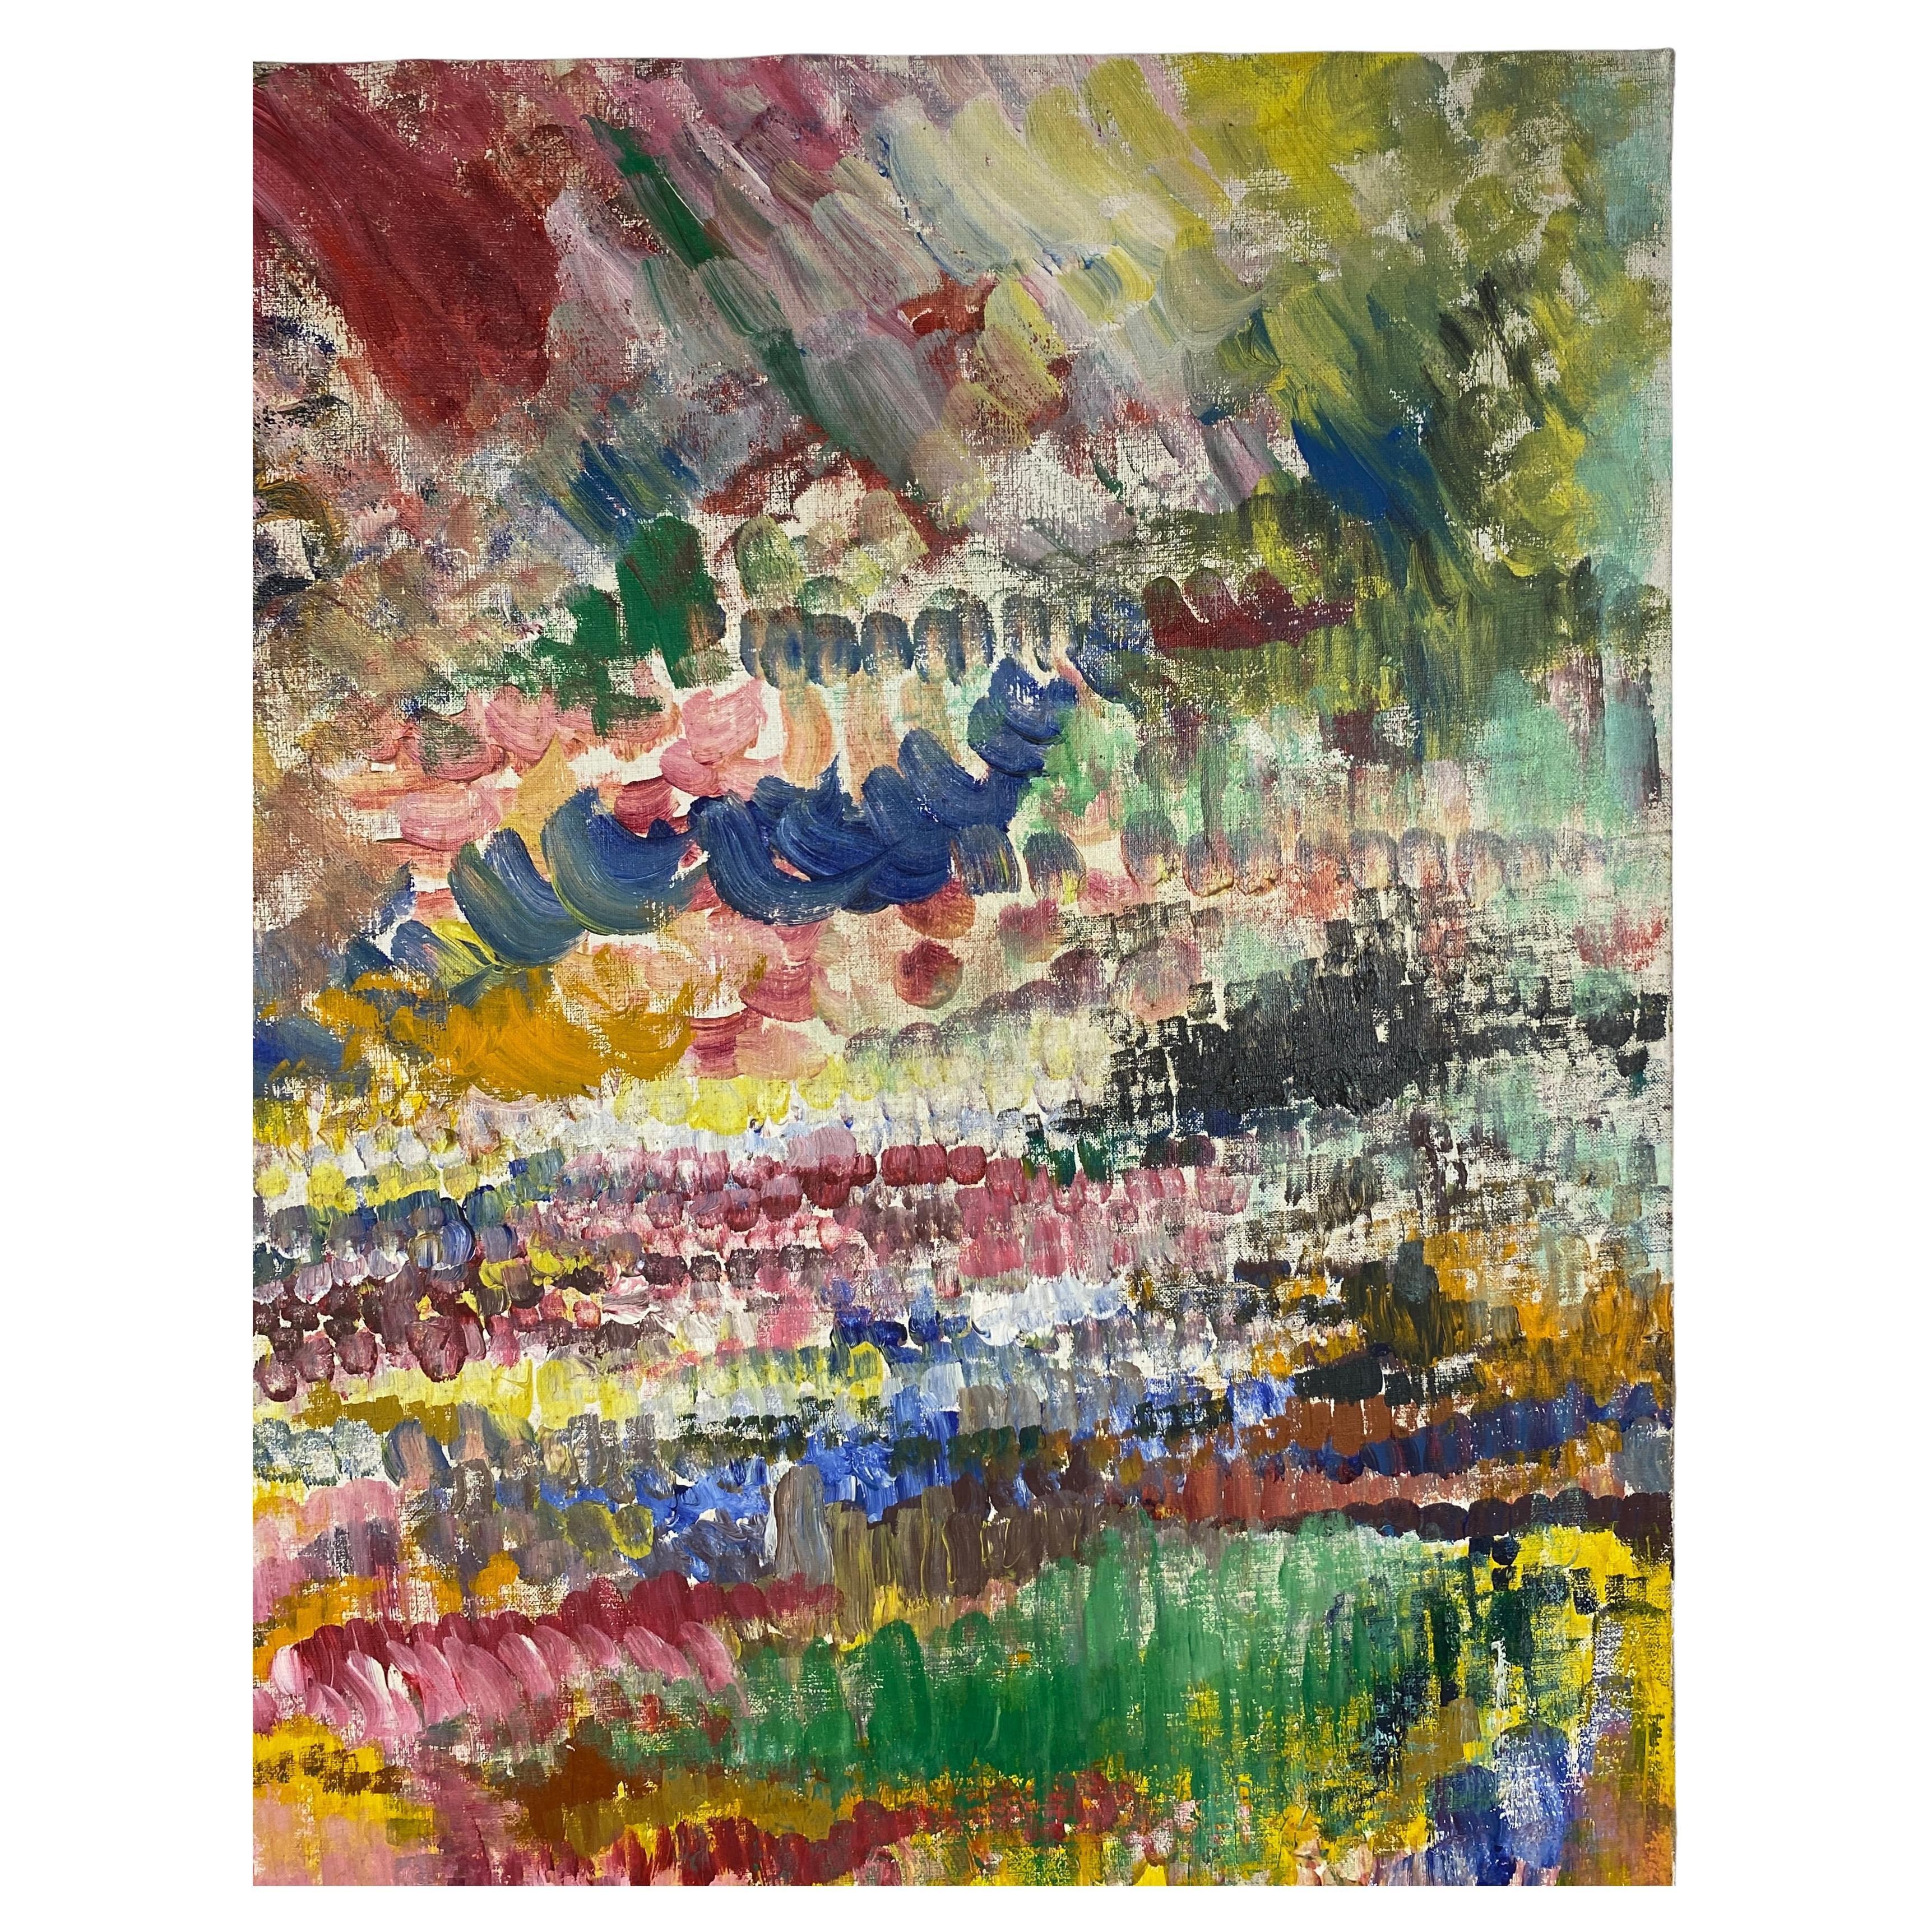 Original, large abstract oil on canvas painting with multiple vibrant colors: pink, blue, yellow, white, green, brown. The texture, lines express movement and the dynamics of life. This vibrant, impasto painting grace walls internationally and